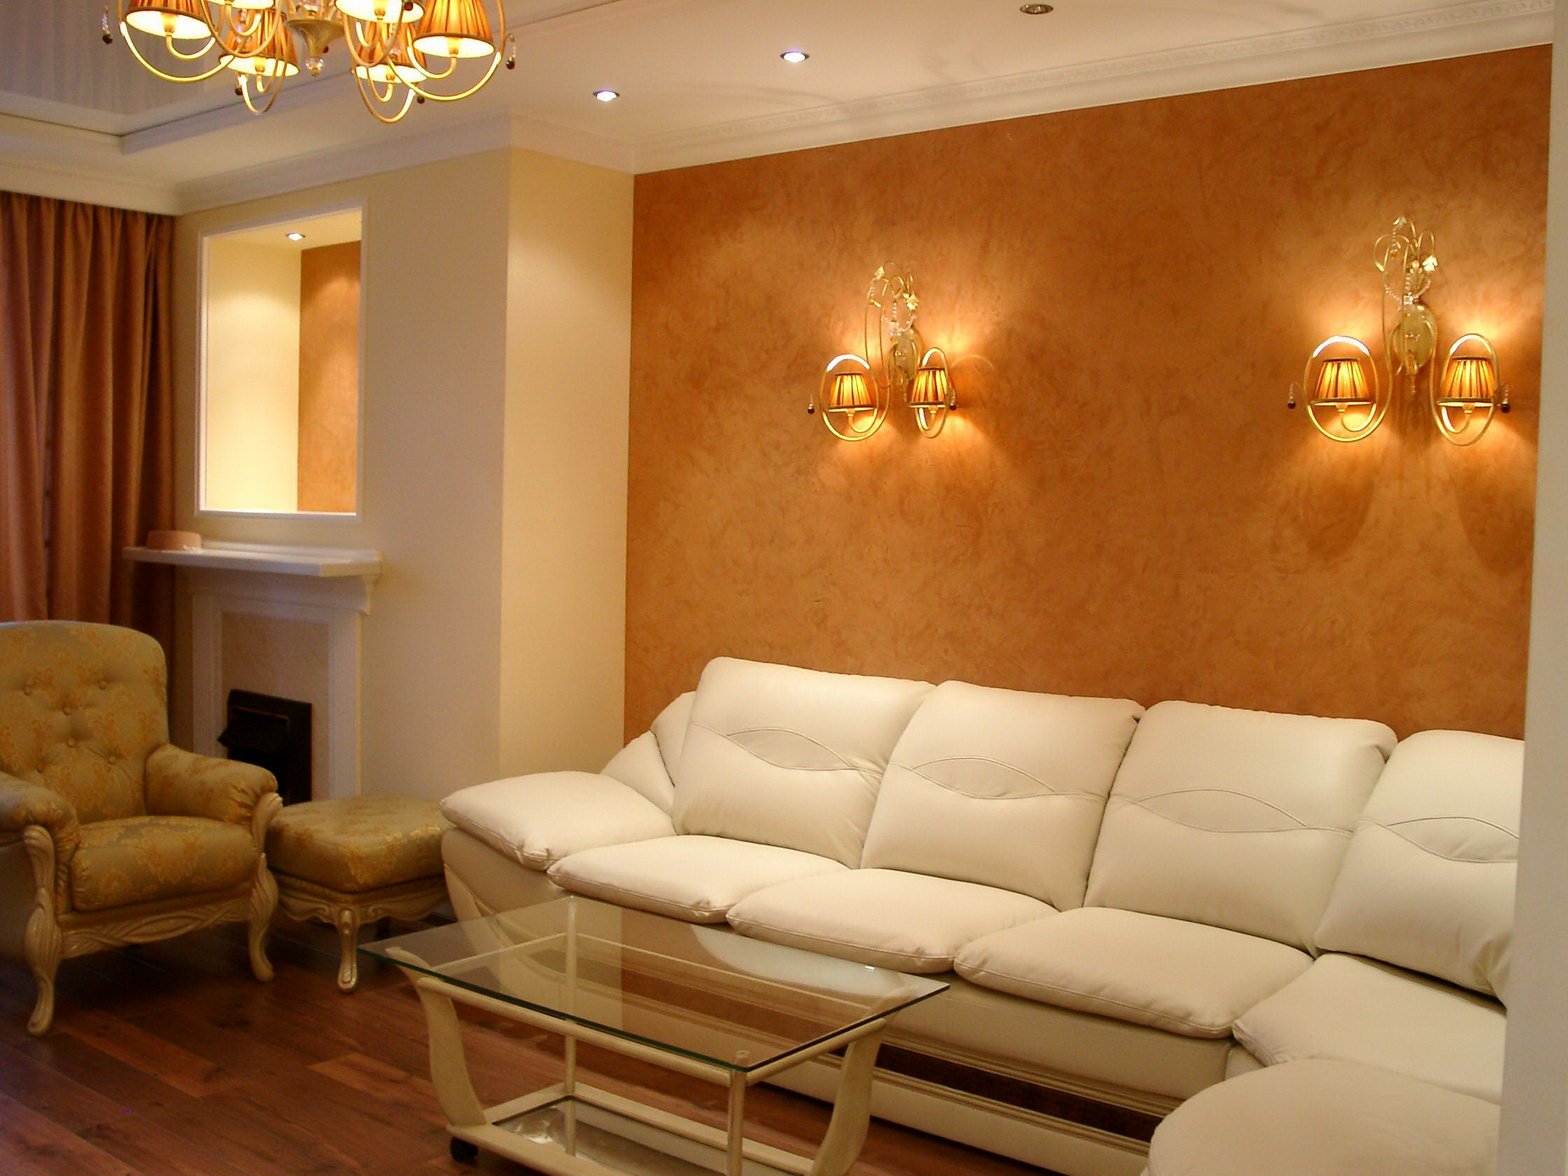 silk wall plaster in the living room